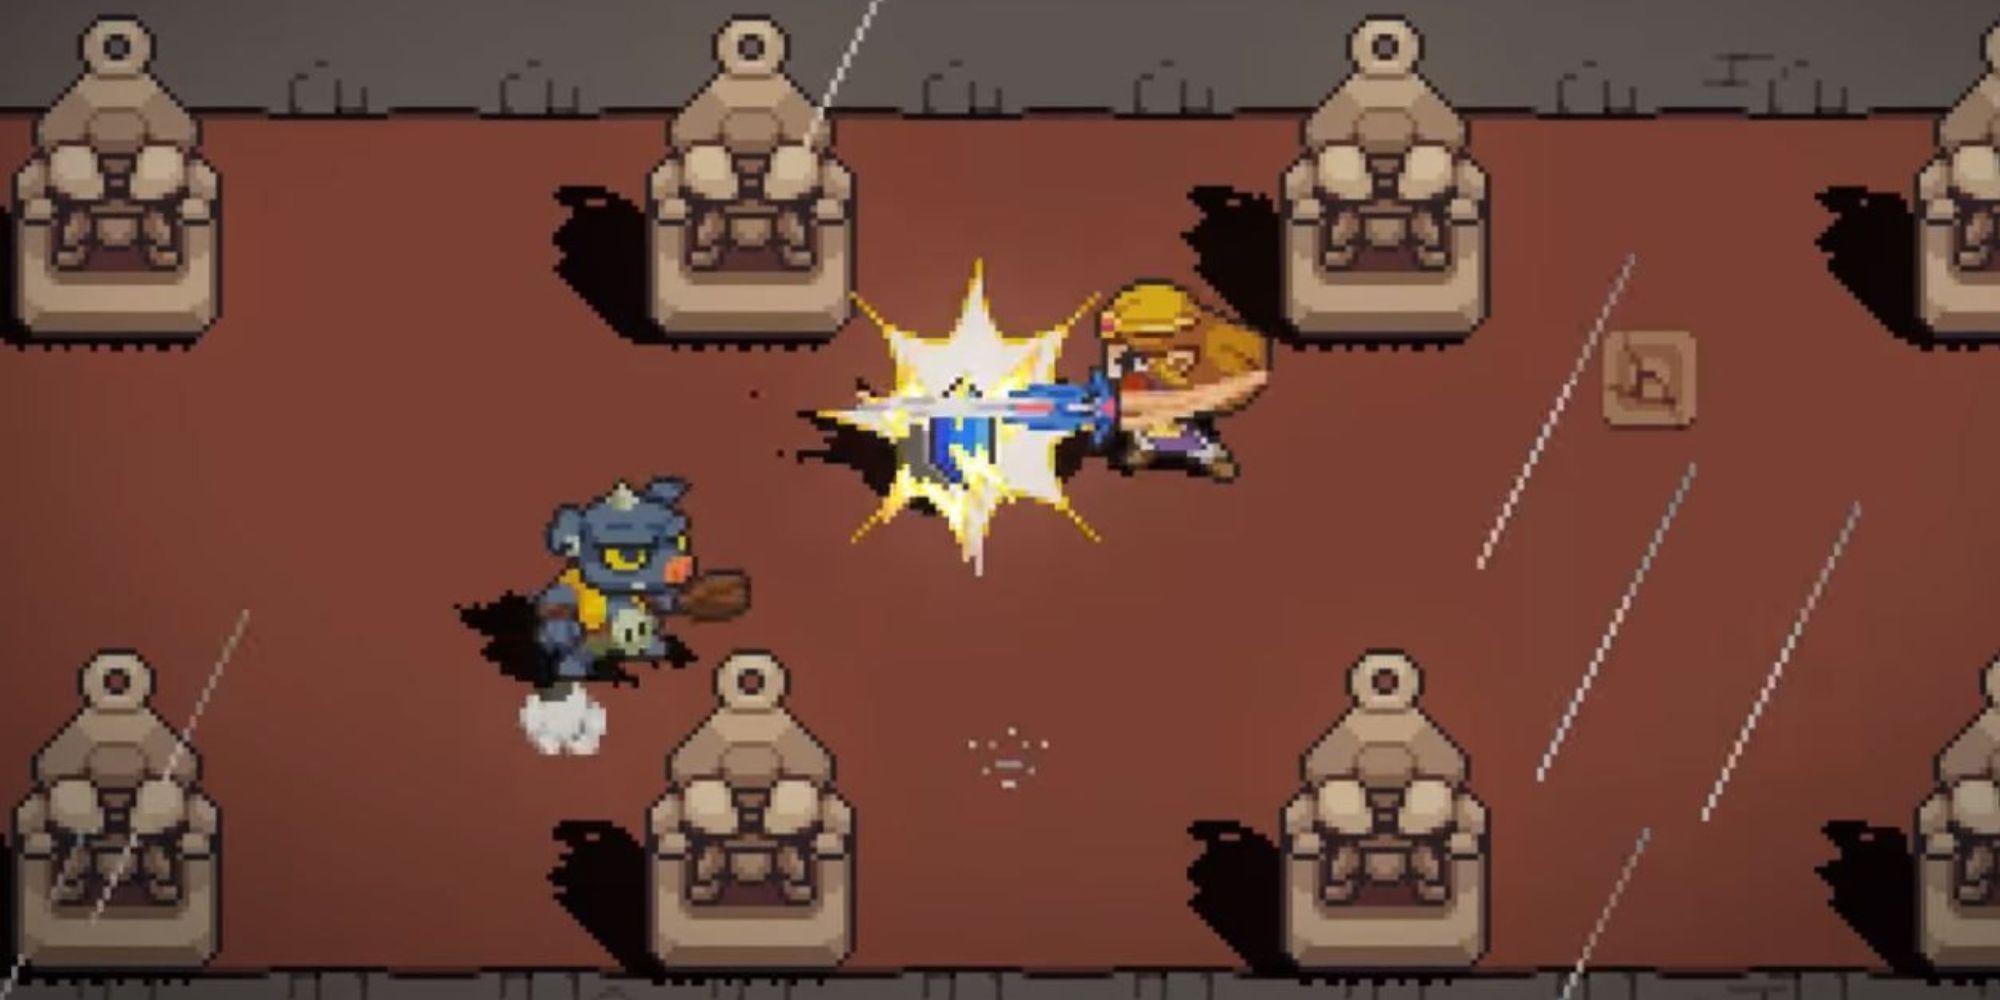 Zelda attacks an enemy while a Bokoblin stands near her in Cadence of Hyrule